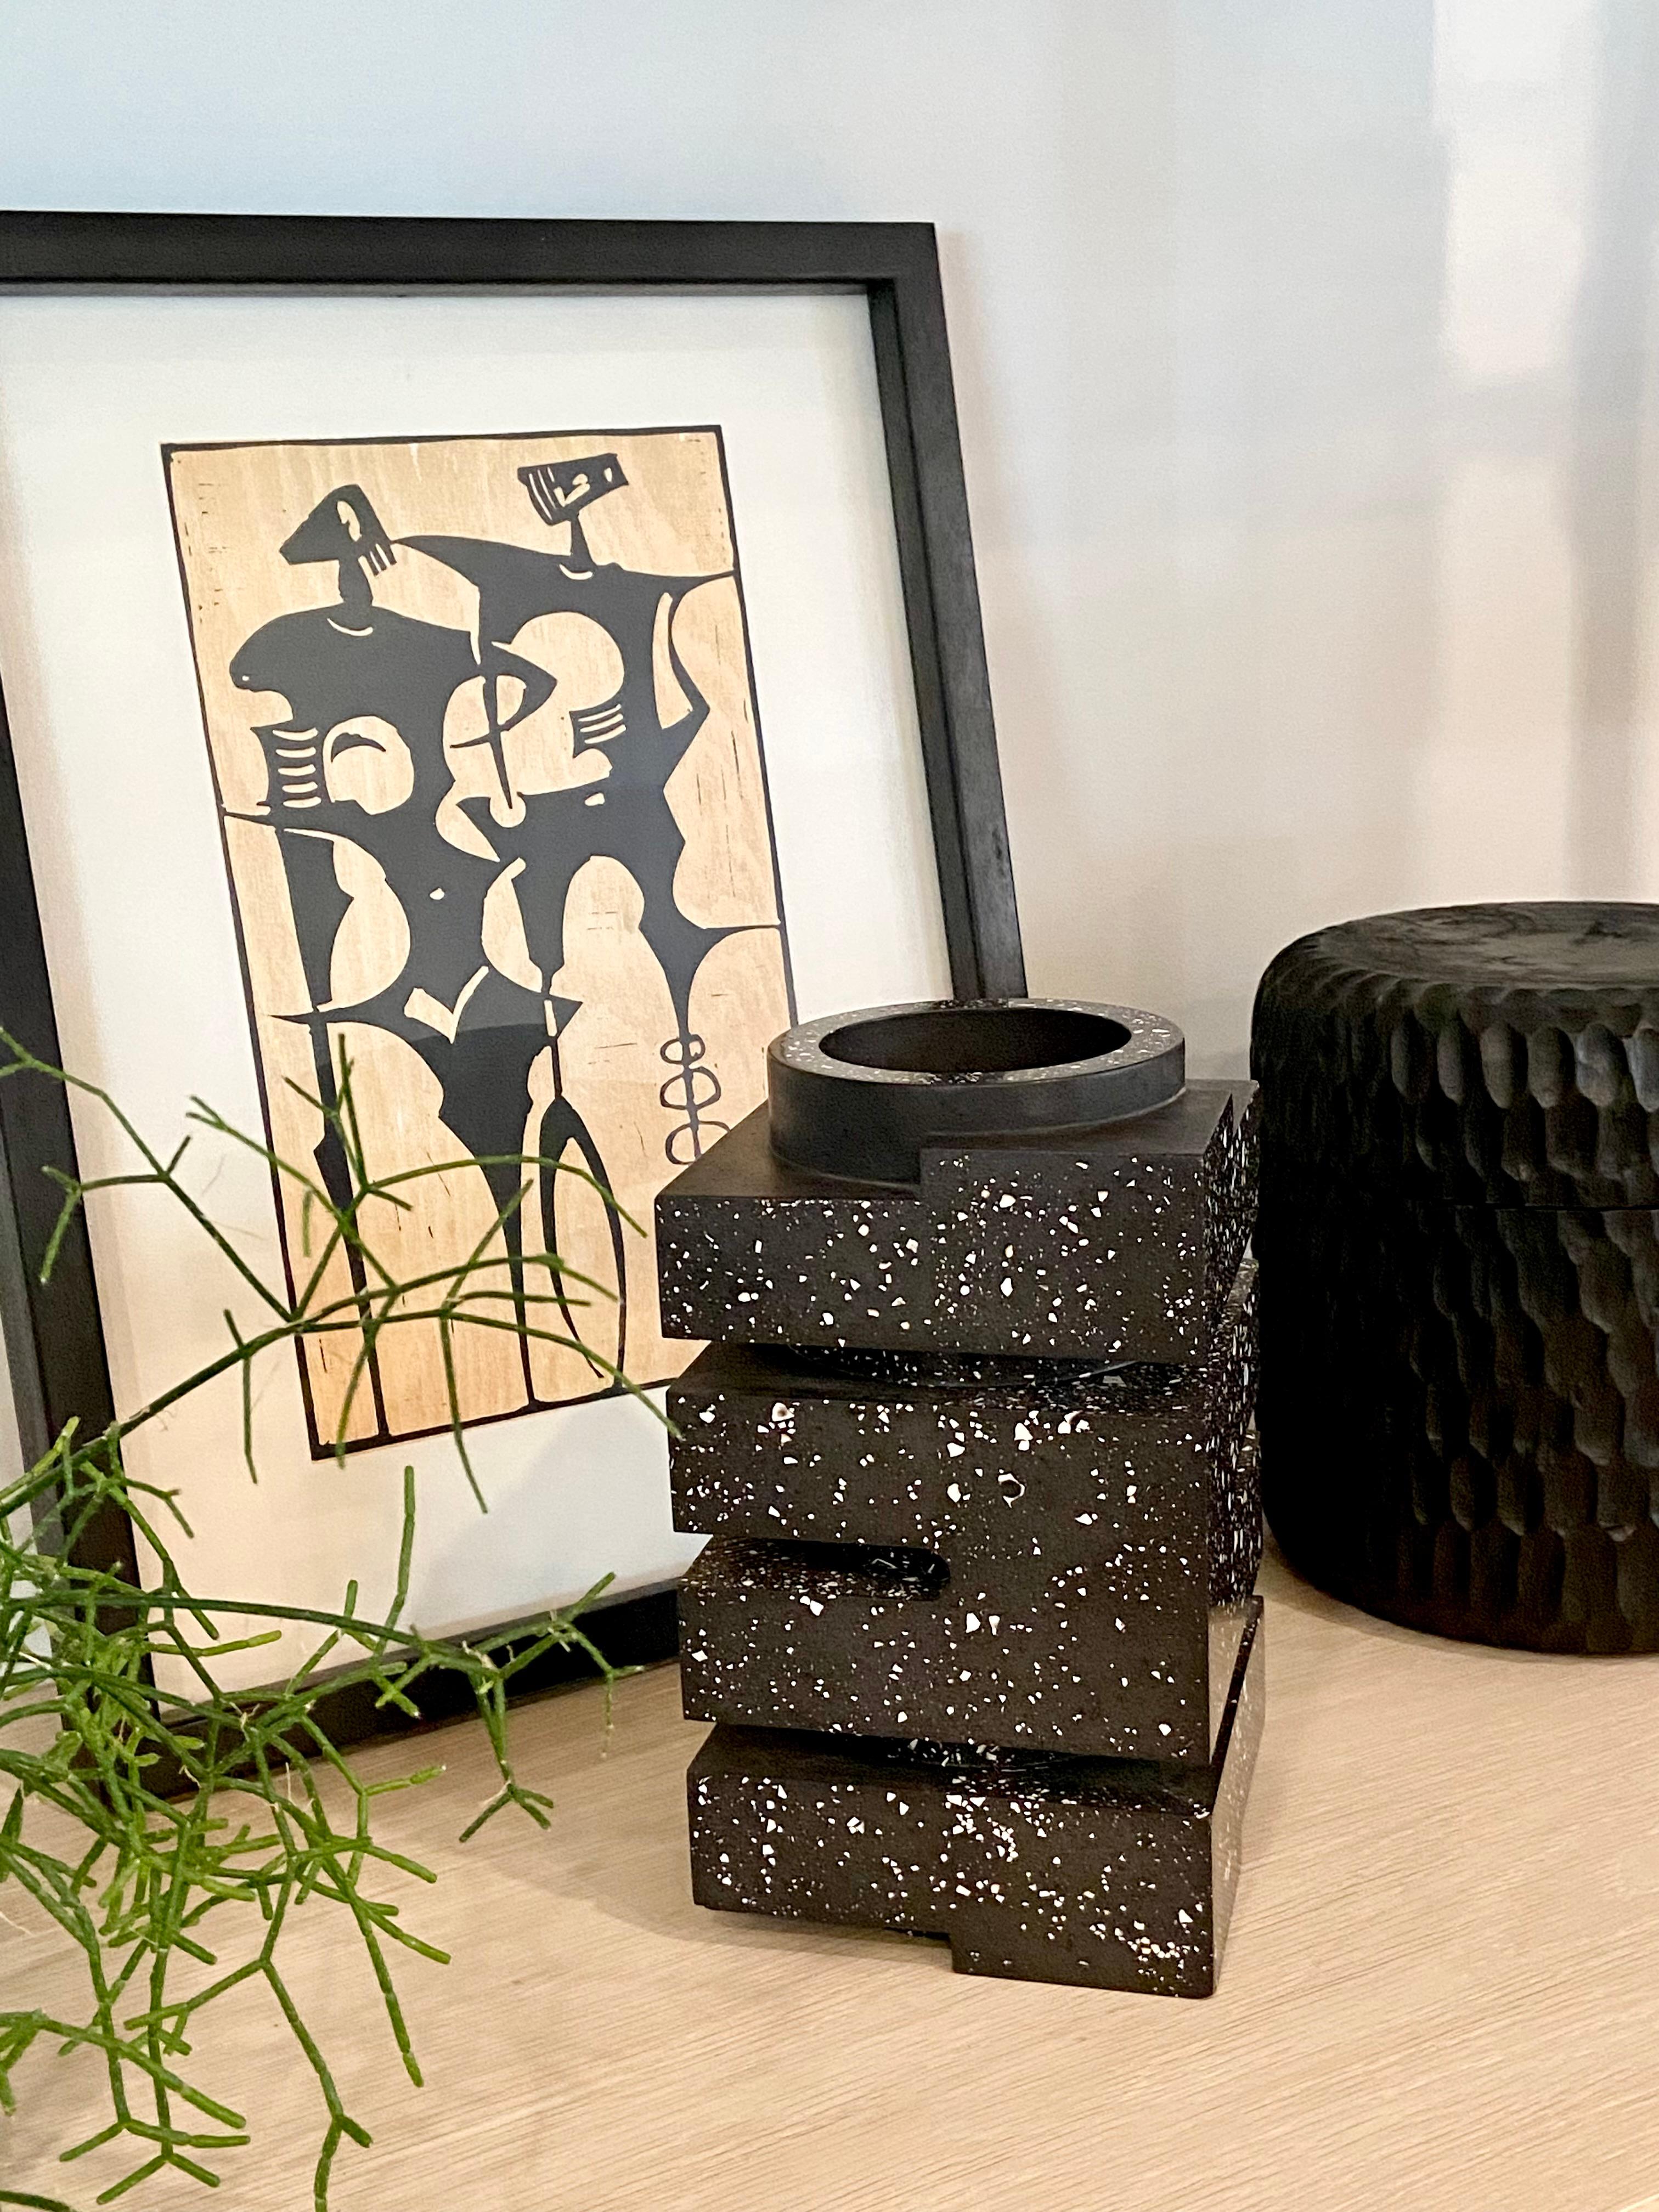 A geometrically composed black resin vase with a speckled terrazzo-like finish. Its' minimal shape is a reference to Bauhaus architecture. It's a fantastic sculptural object for a modernist interior. This vase is for decorative use only and is not